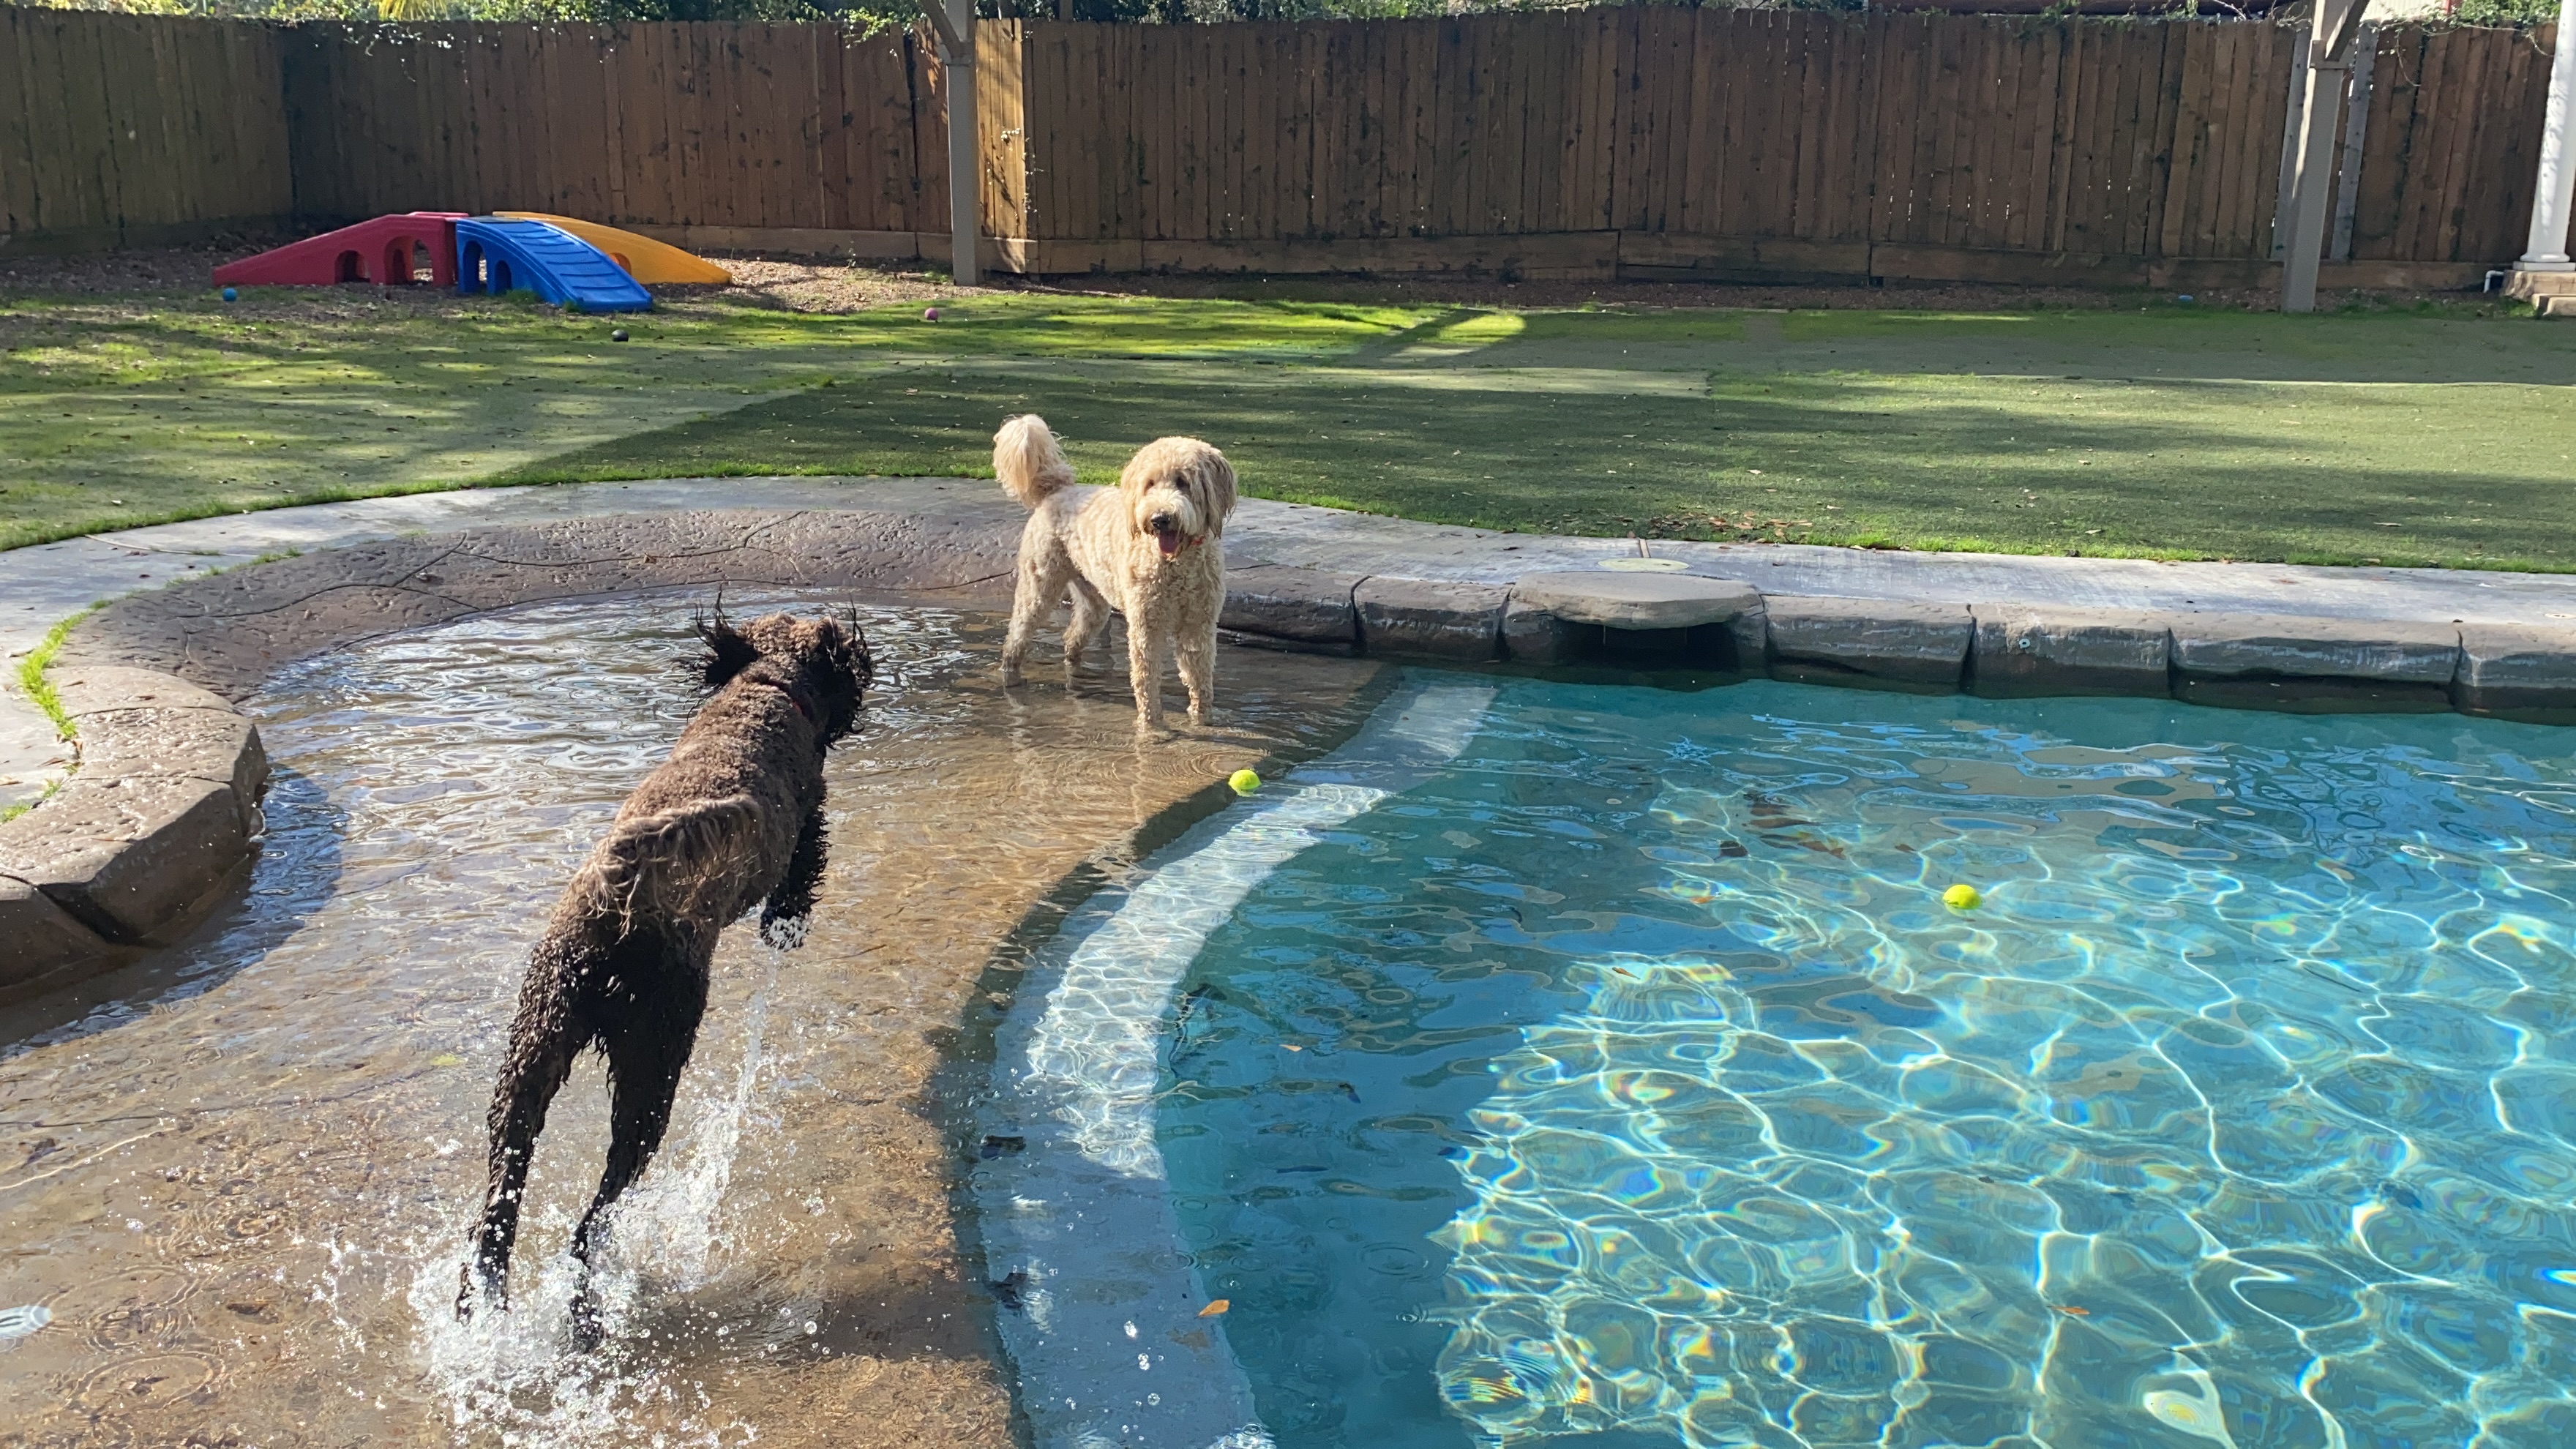 This is Wesley and Ranger. Wesley is a Goldendoodle and Ranger is Labradoodle. Wesley's fur is golden tan and Ranger is dark brown.